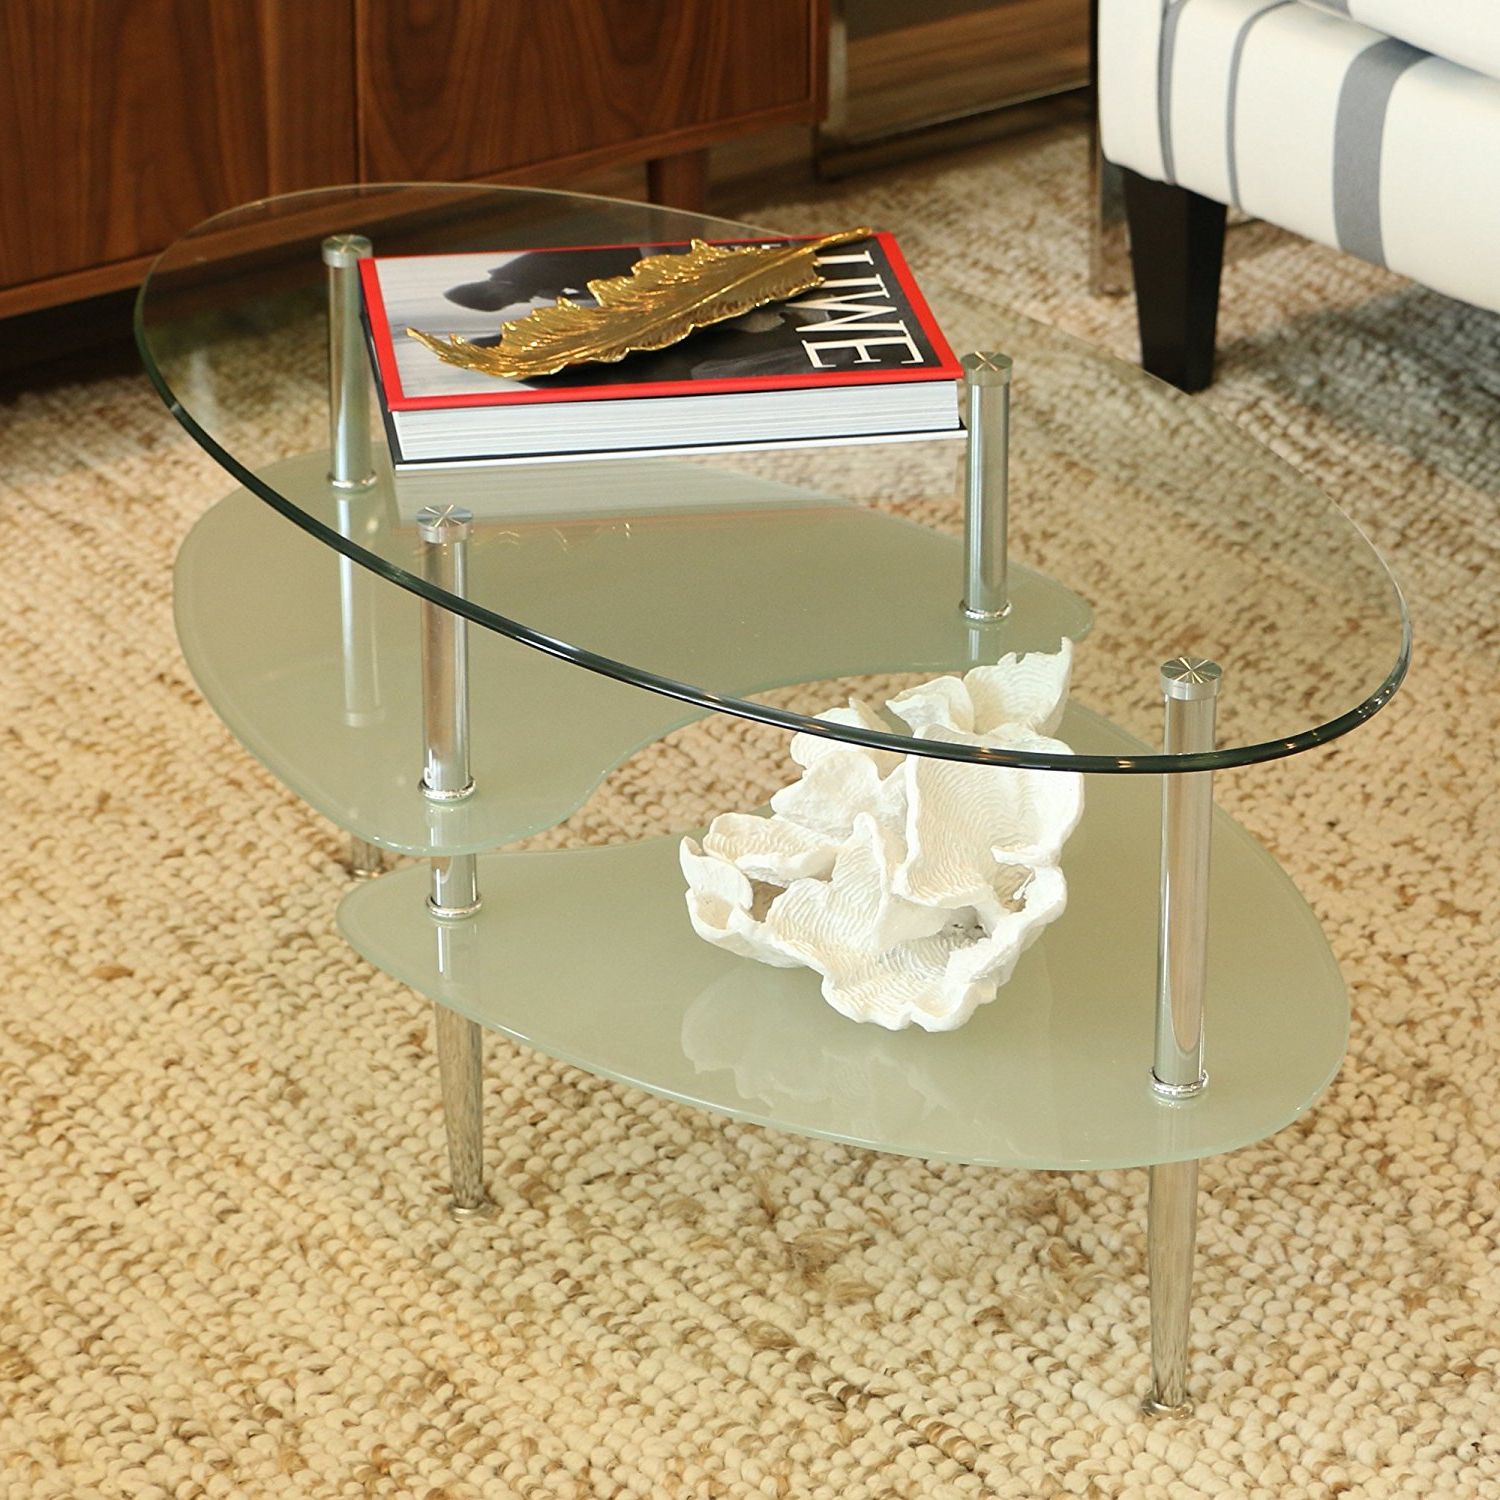 3 Tier Coffee Tables For Recent 14 3 Tier Glass Coffee Table Pics (View 3 of 10)